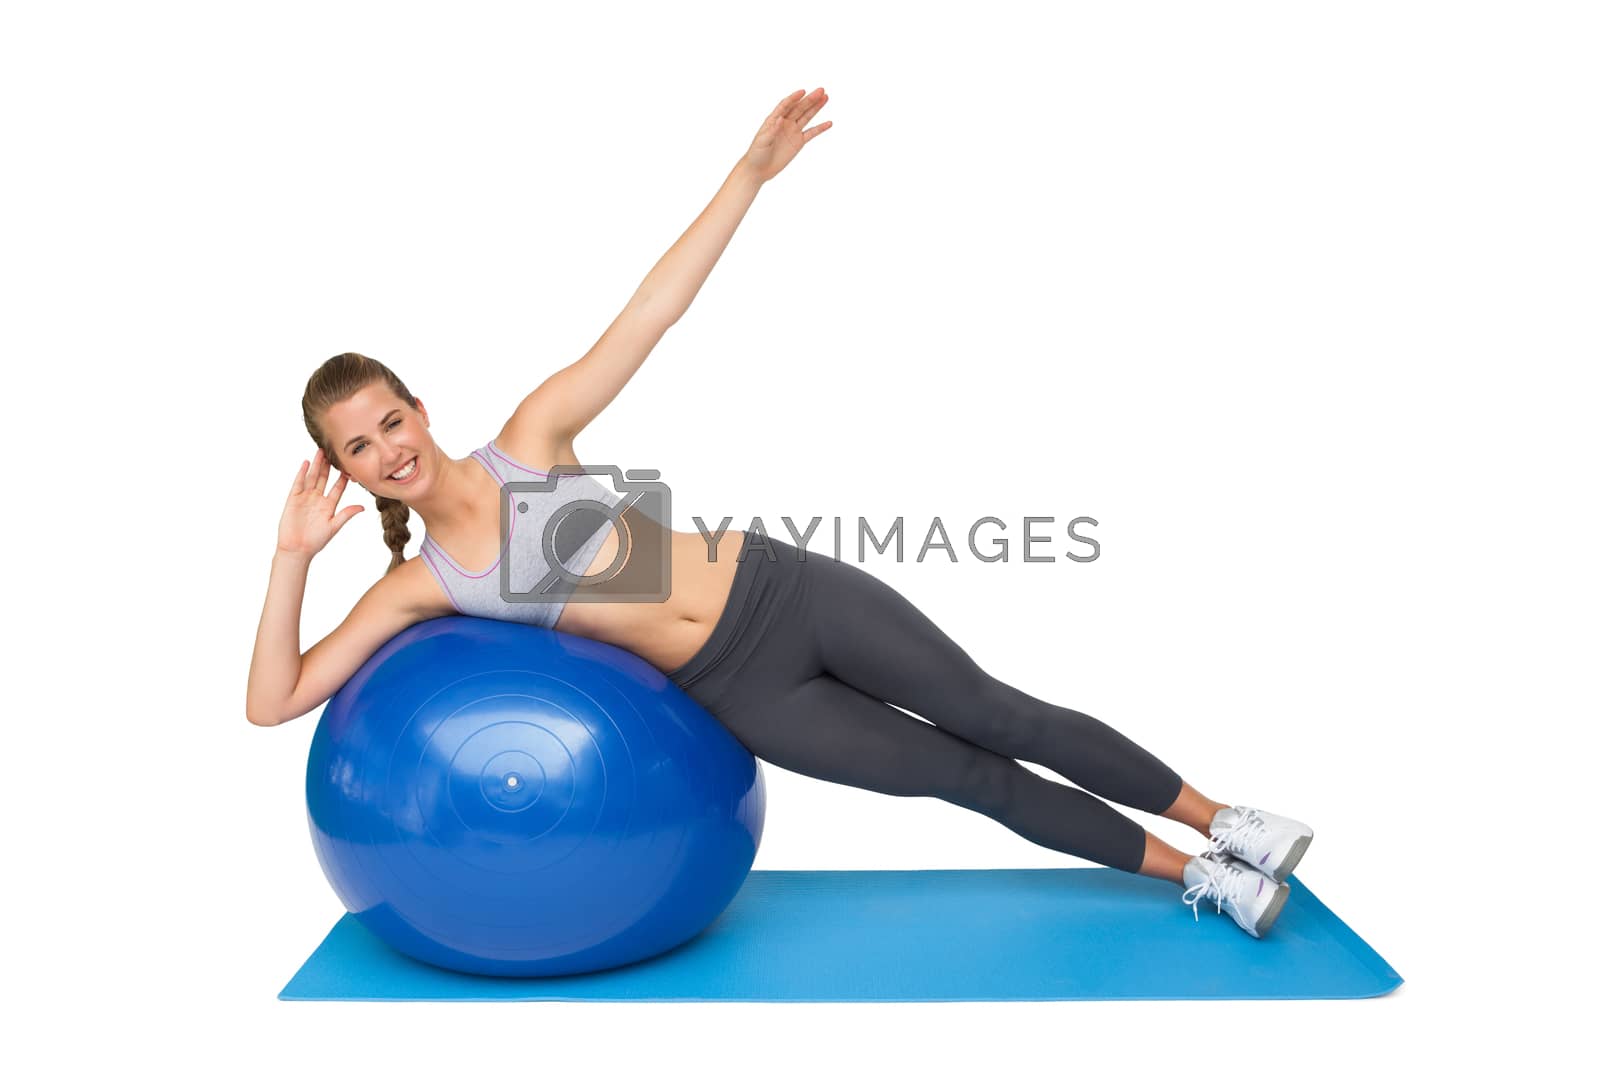 Royalty free image of Portrait of a fit woman stretching on fitness ball by Wavebreakmedia